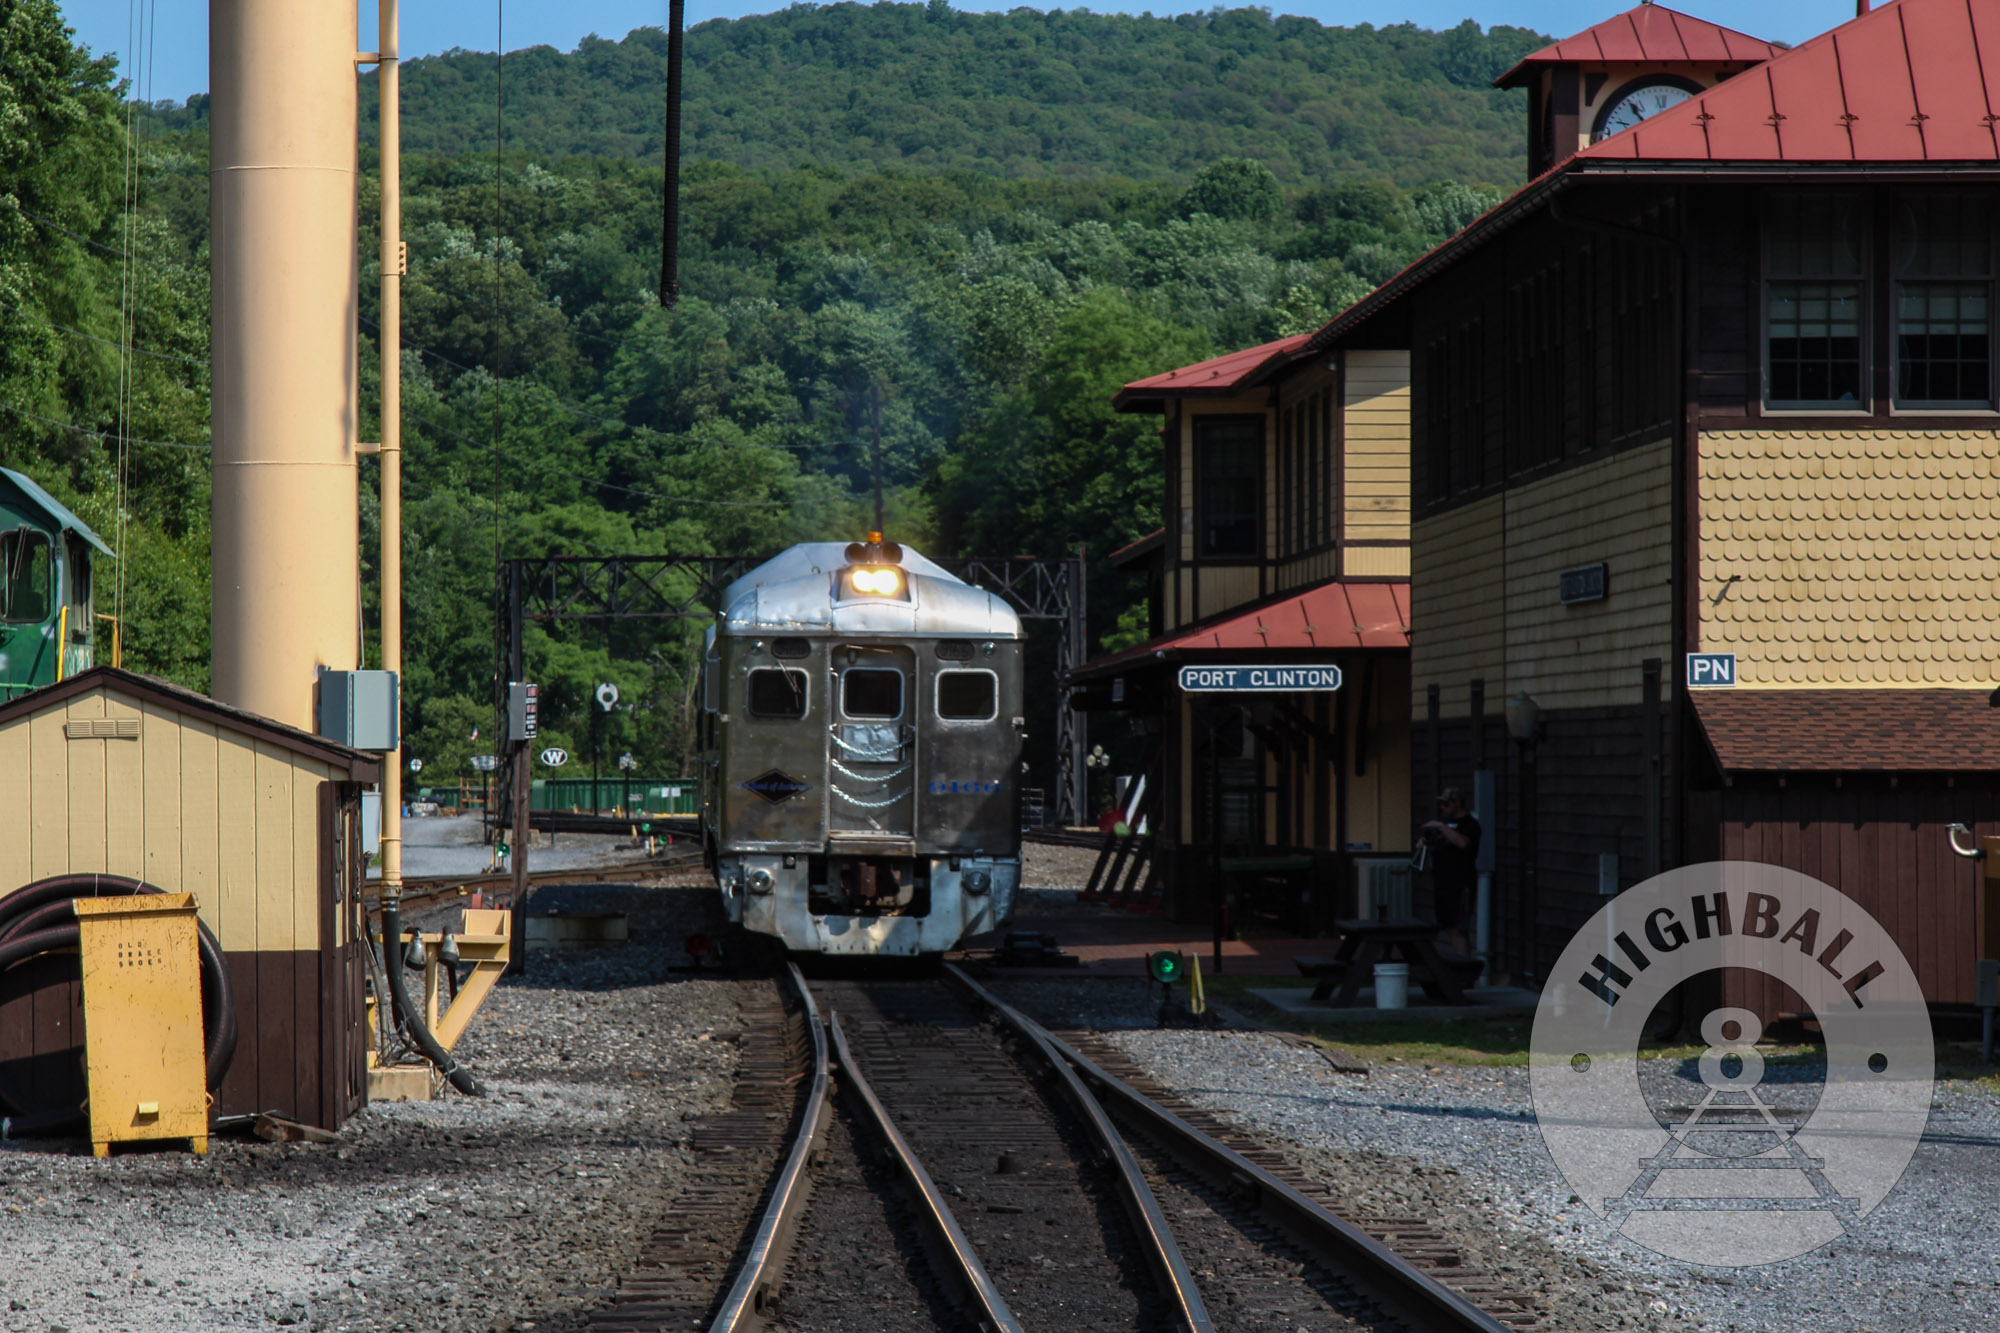 The RDC excursion special outside of the Reading Blue Mountain & Northern Railroad's corporate headquarters, a refurbished train station in Port Clinton, Pennsylvania, USA, 2016.